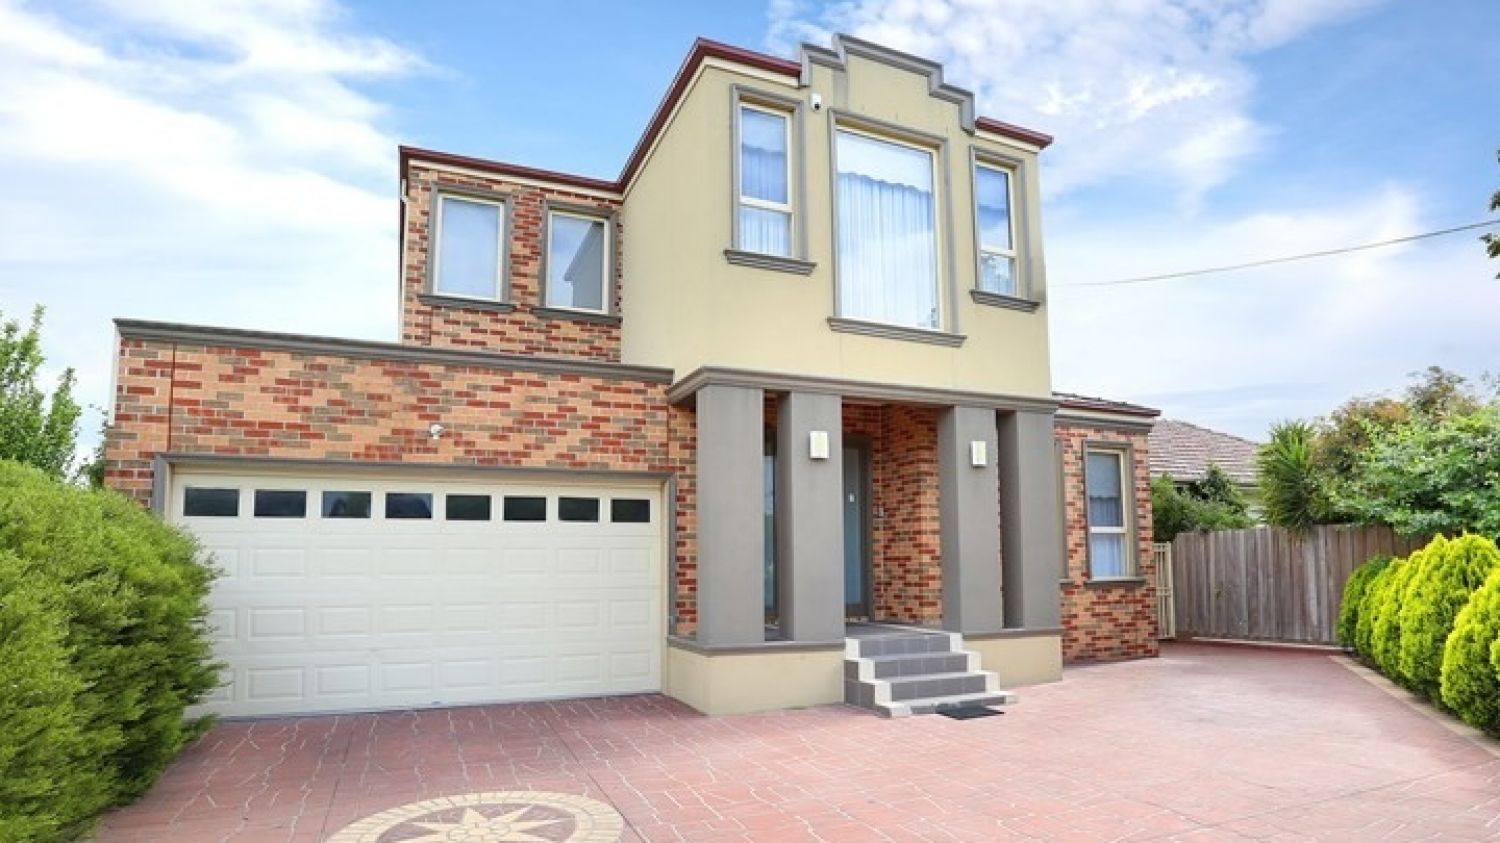 This five-bedroom home at 23 Wheatsheaf Road, Glenroy, sold for $1.11 million. Photo: Barry Plant